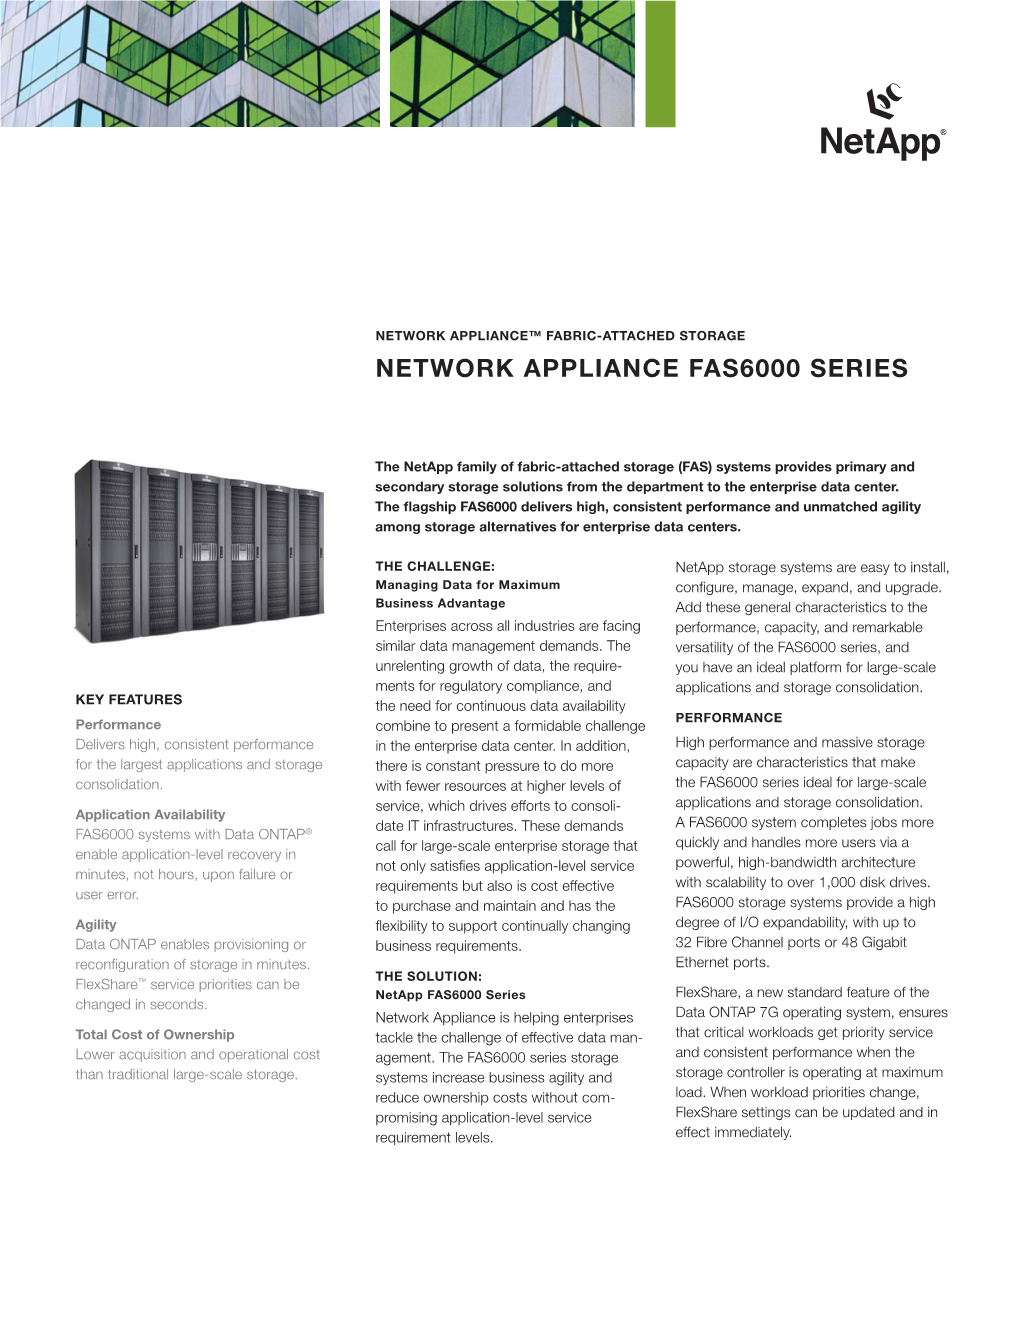 Netapp FAS6000 Series Flexshare, a New Standard Feature of the Changed in Seconds